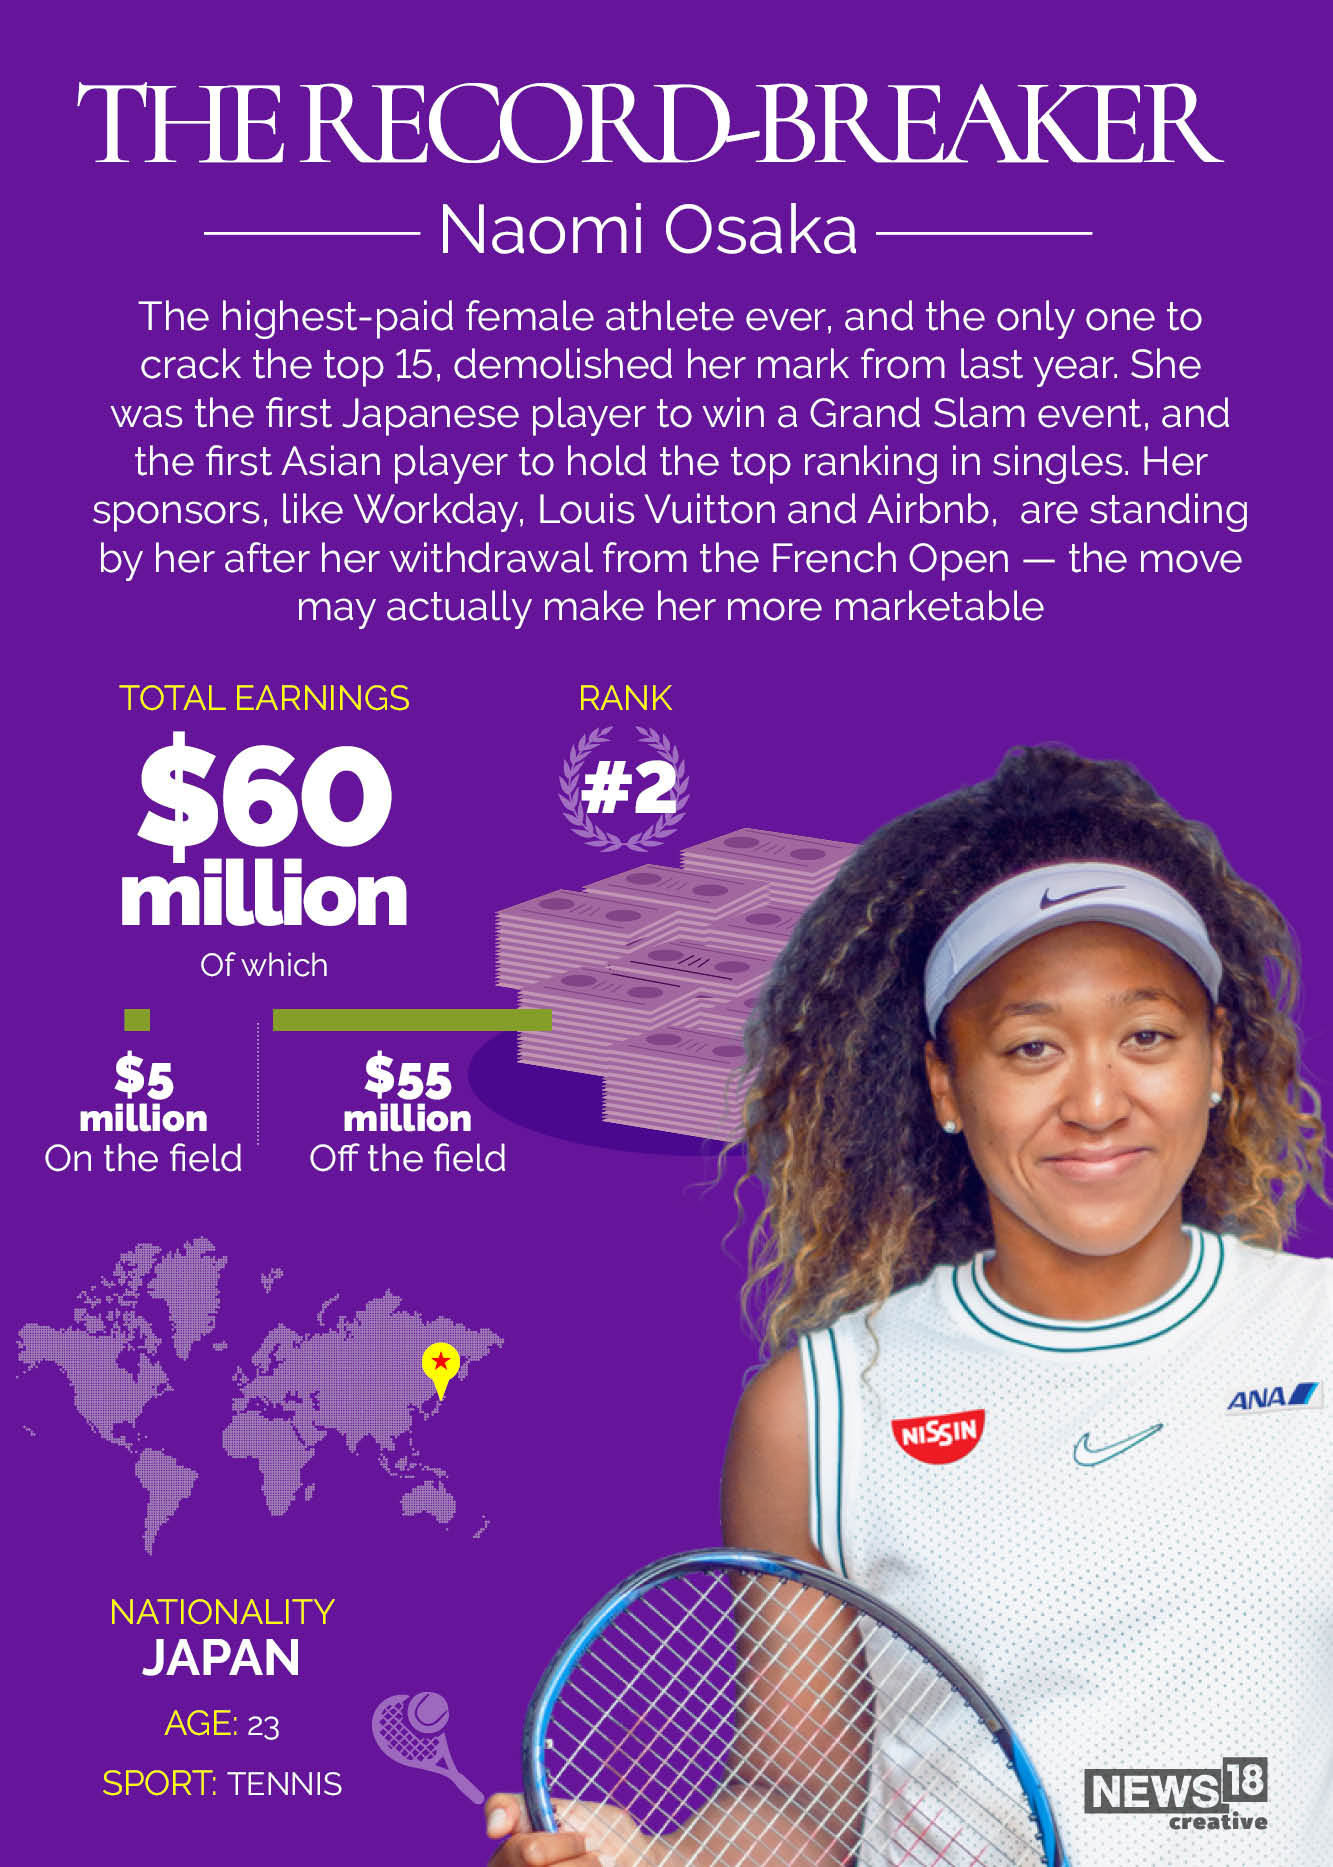 World's highest paid athletes 2021: Conor McGregor no 1; Naomi Osaka, Serena Williams the only female athletes in top 50